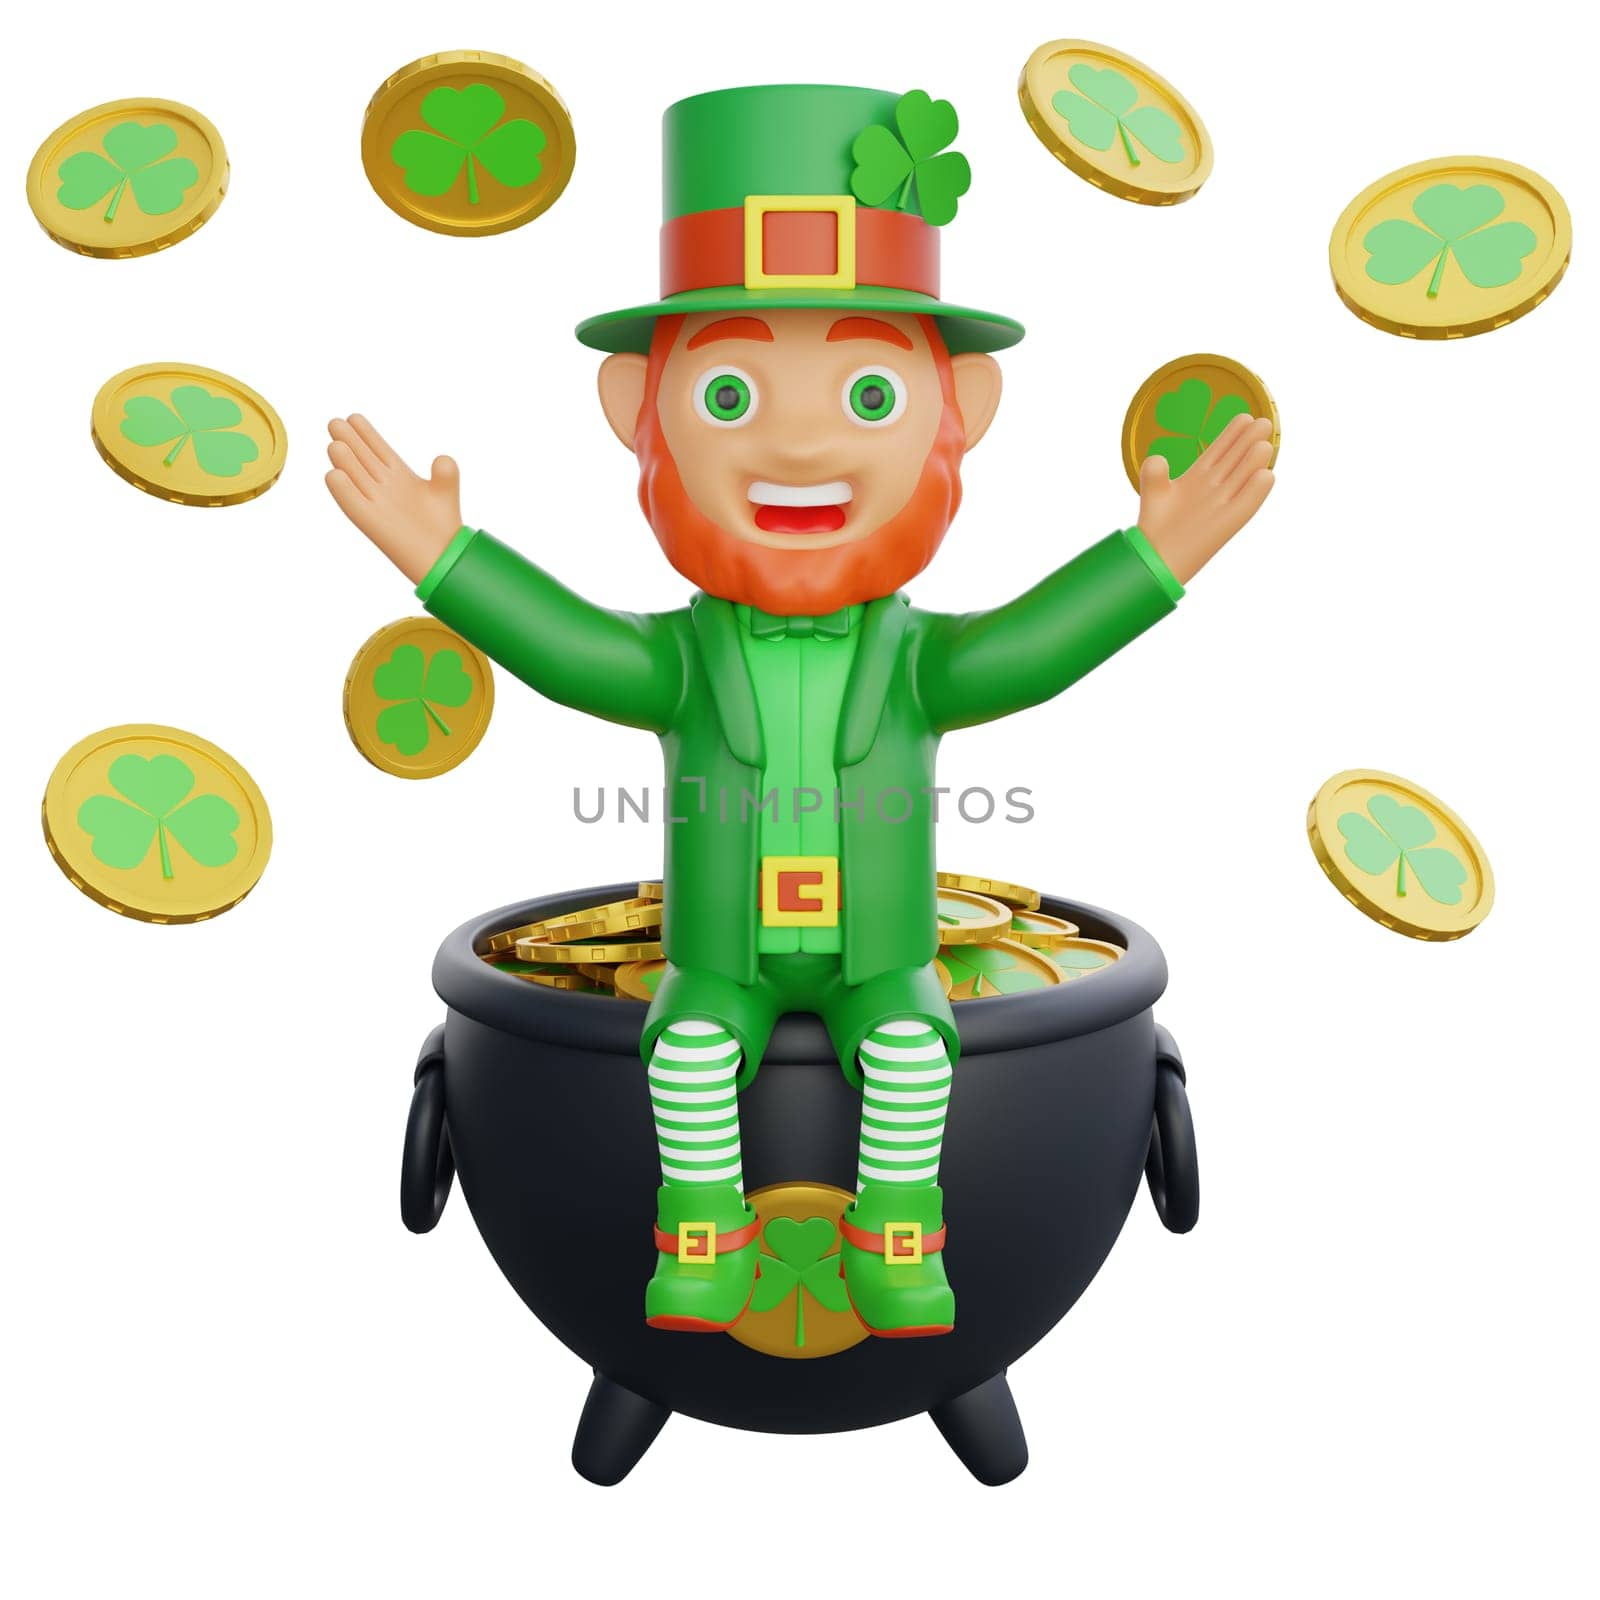 3D illustration of a joyful leprechaun, surrounded by golden coins adorned with clovers, symbolizing luck and prosperity, perfect for St. Patrick's Day themed projects